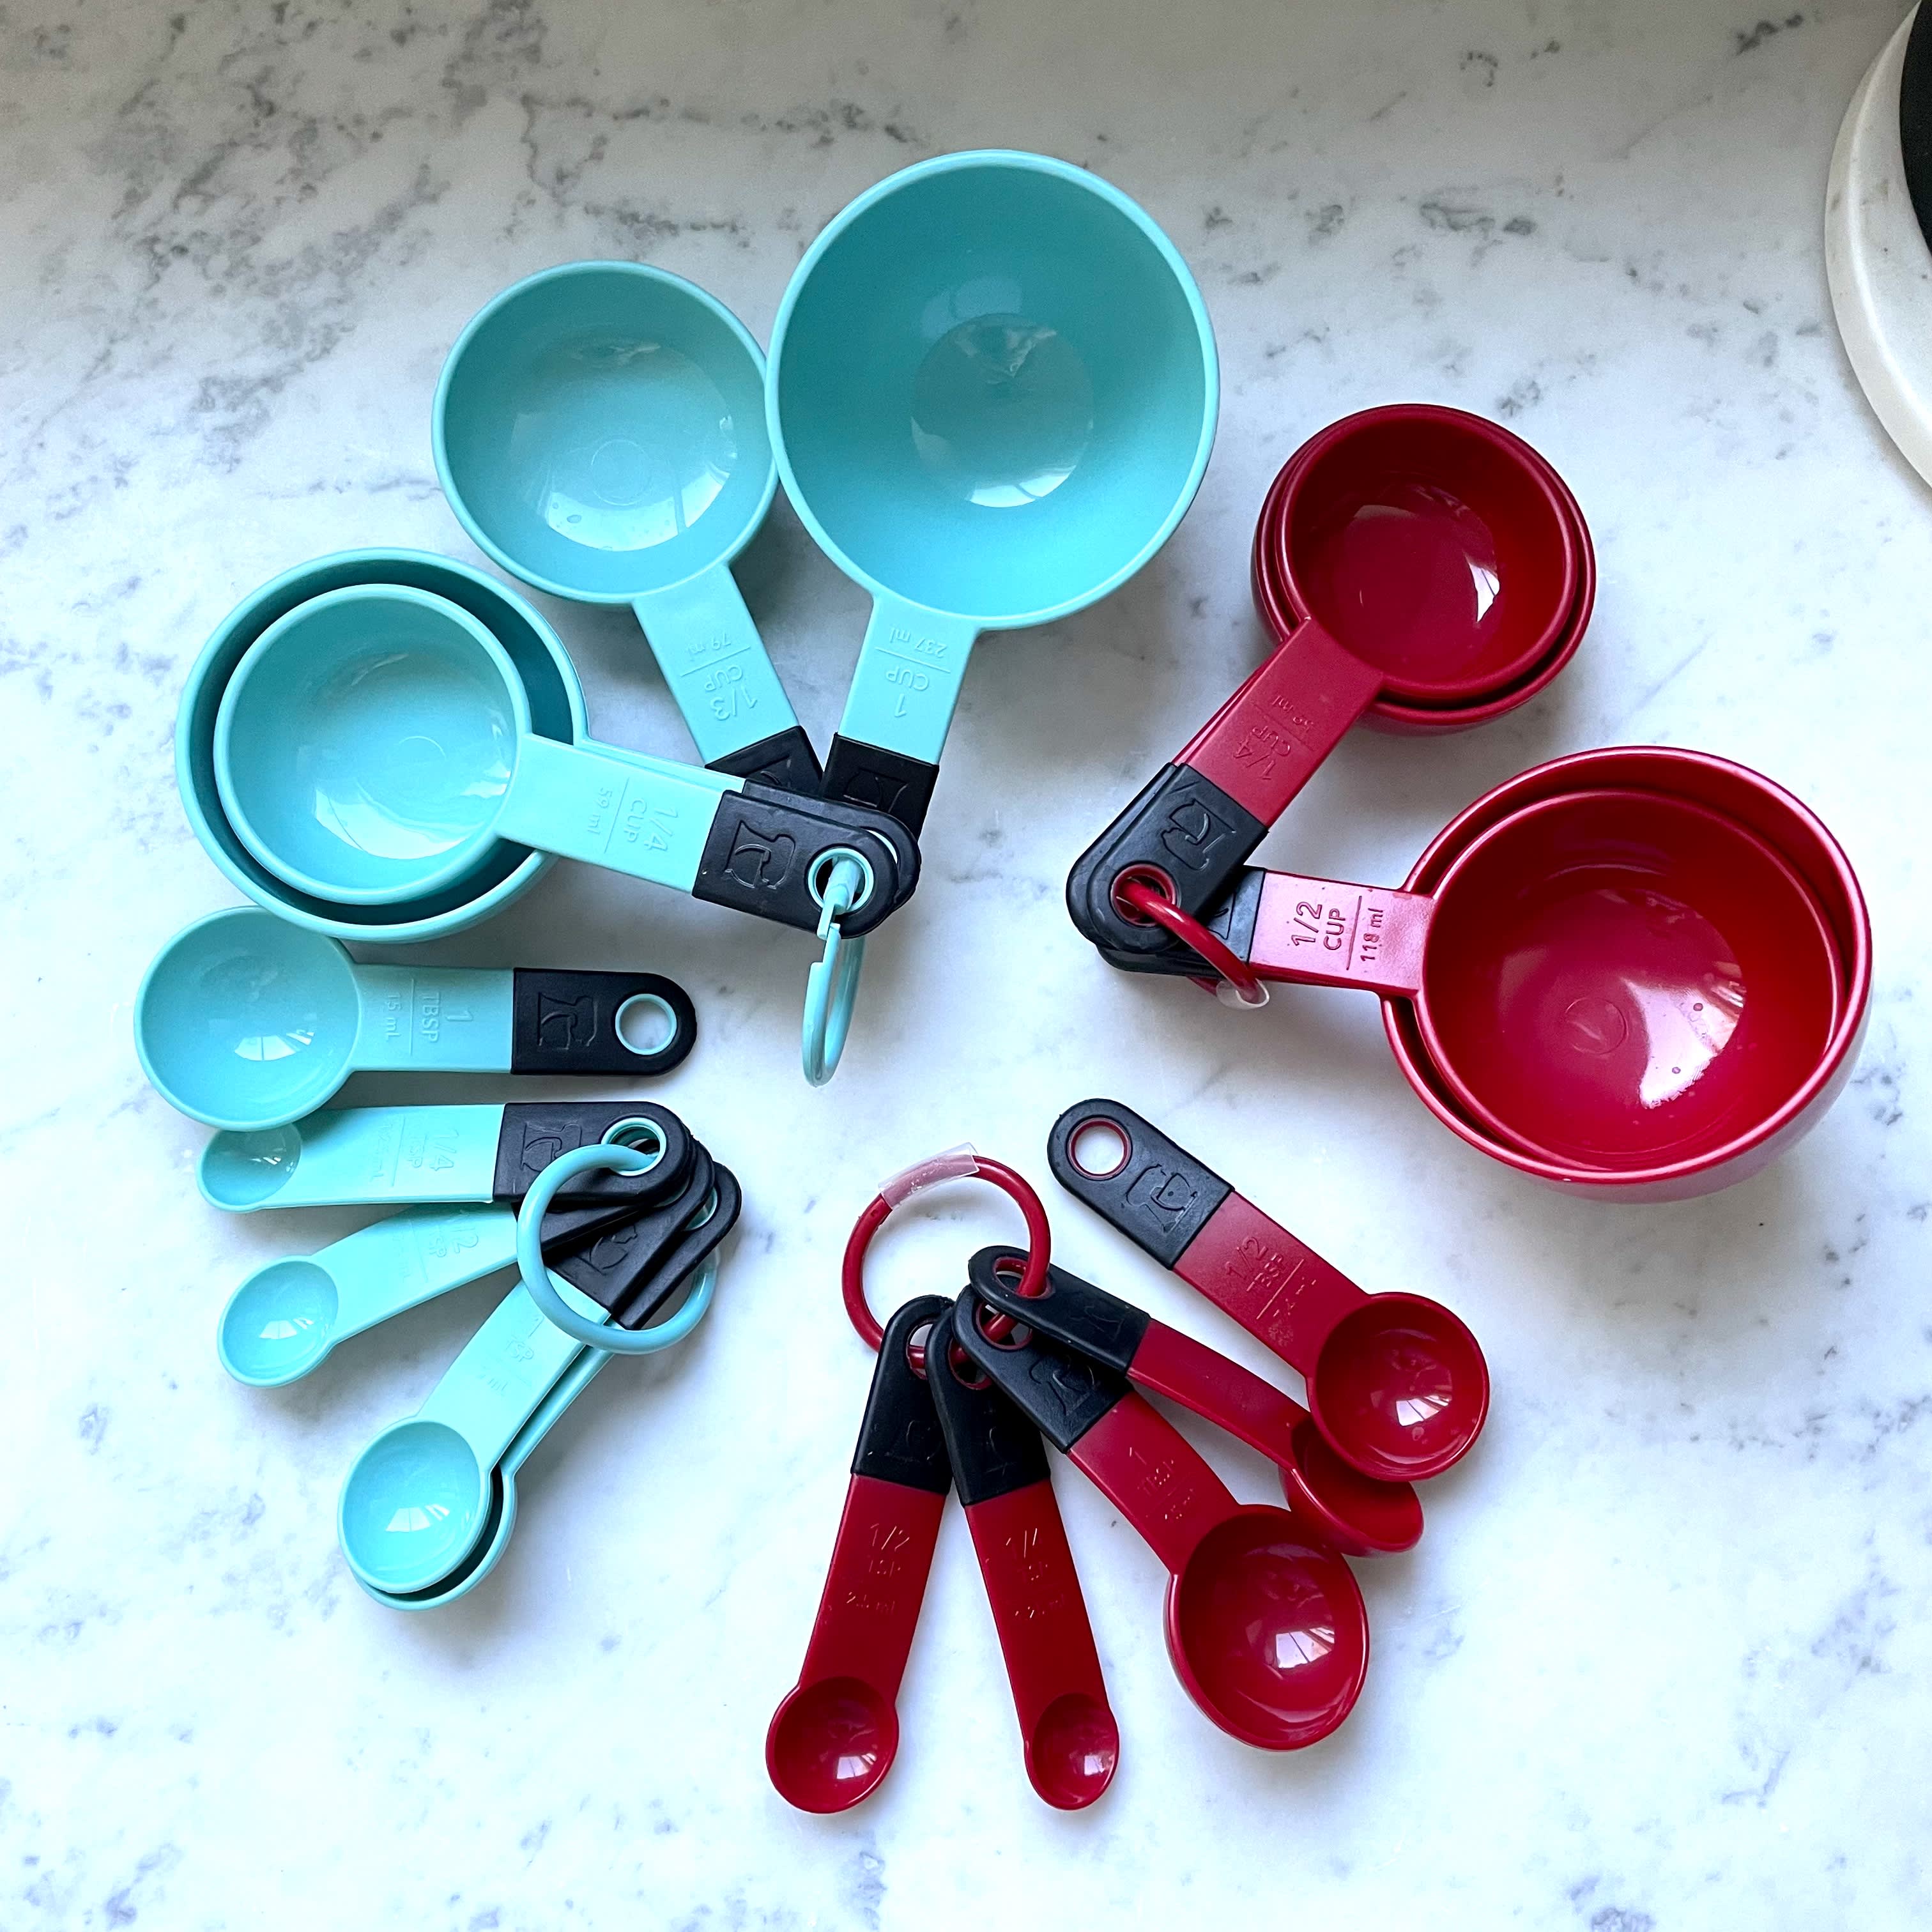 KITCHENAID, 12 Piece, Measuring Cups and Spoons, Red, NEW IN BOX